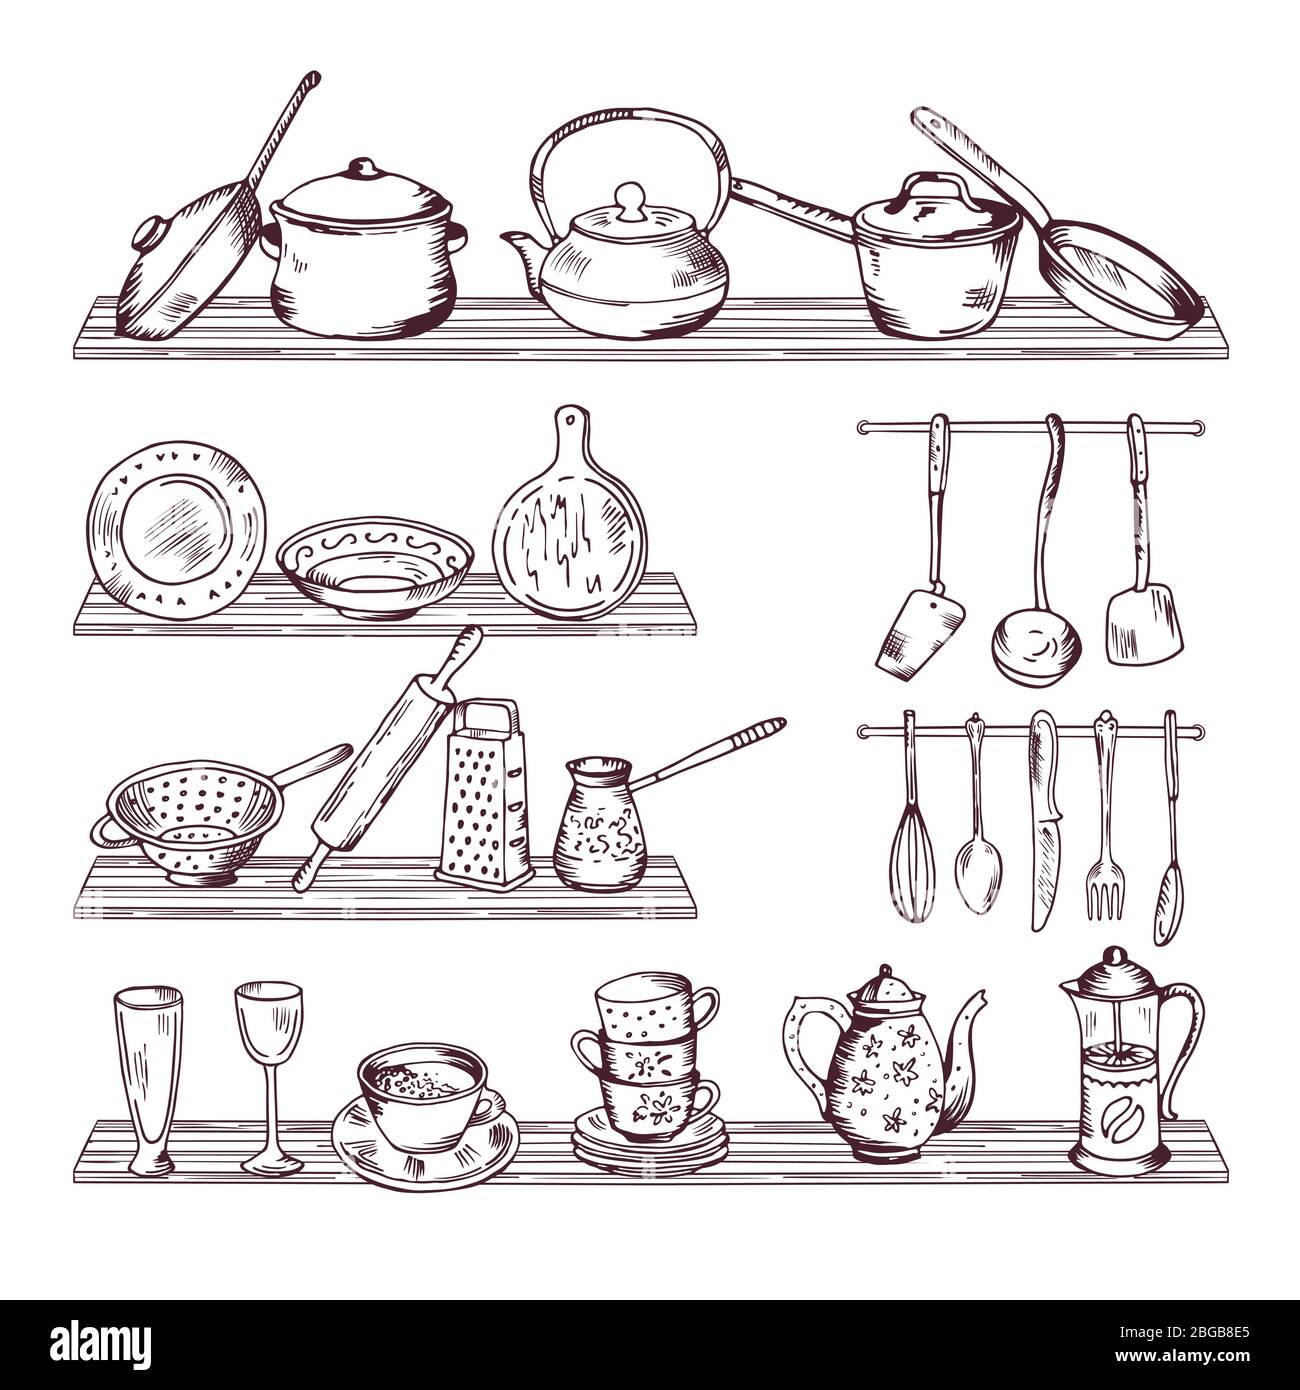 https://c8.alamy.com/comp/2BGB8E5/kitchen-wooden-shelves-with-different-tools-hand-drawn-vector-illustration-isolate-on-white-background-2BGB8E5.jpg